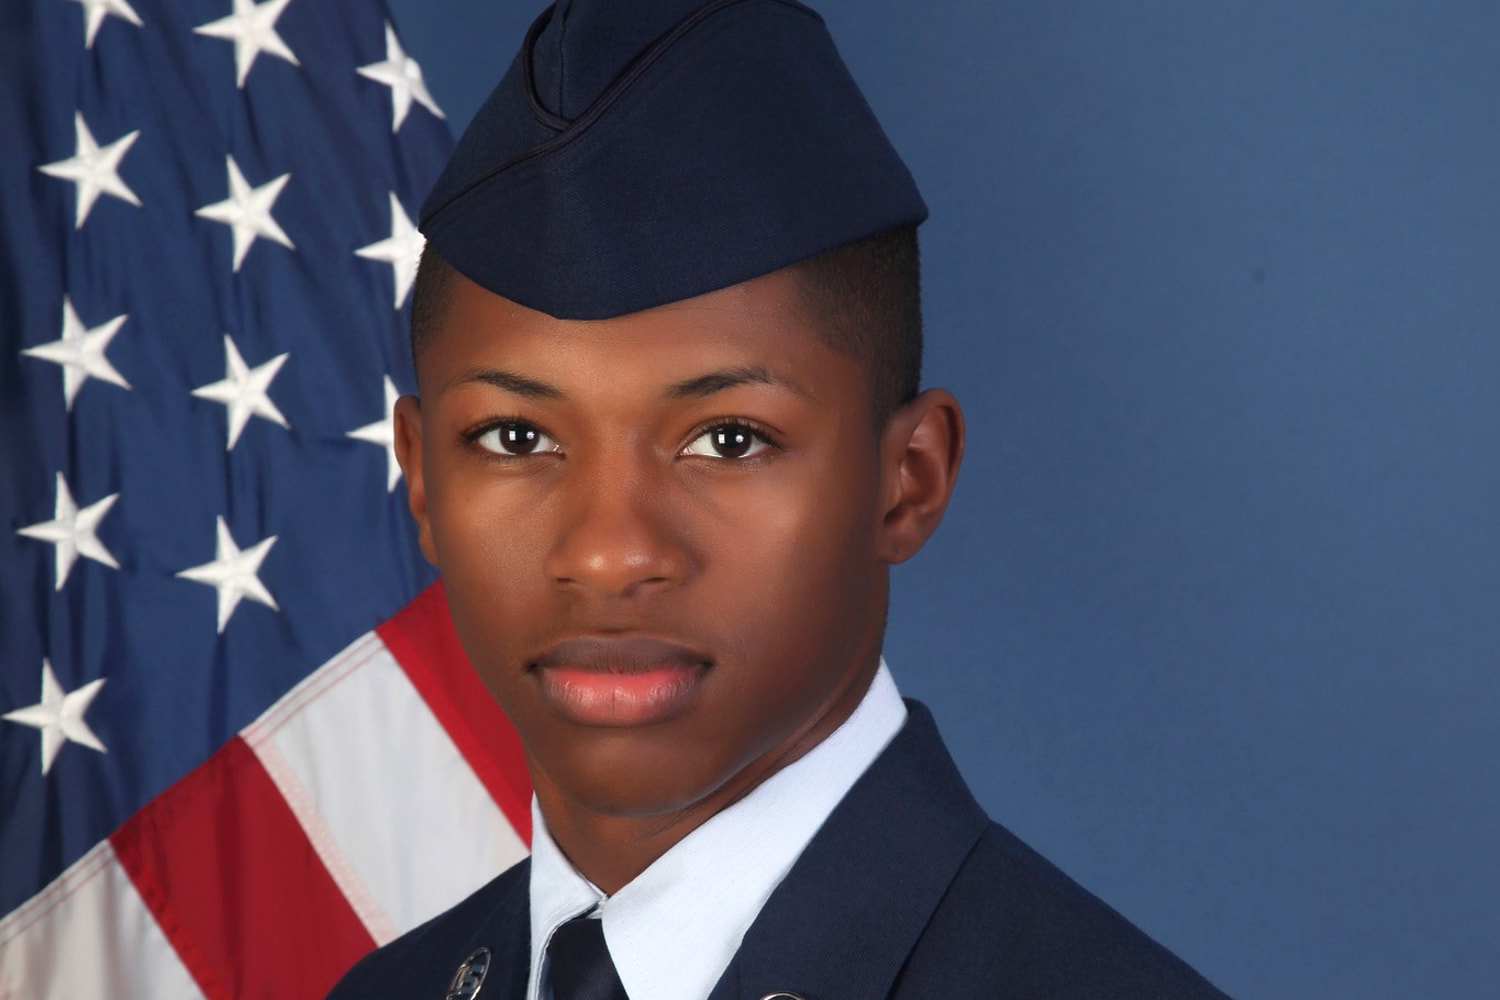 Florida sheriff’s office releases bodycam video of fatal shooting of Air Force airman by deputy